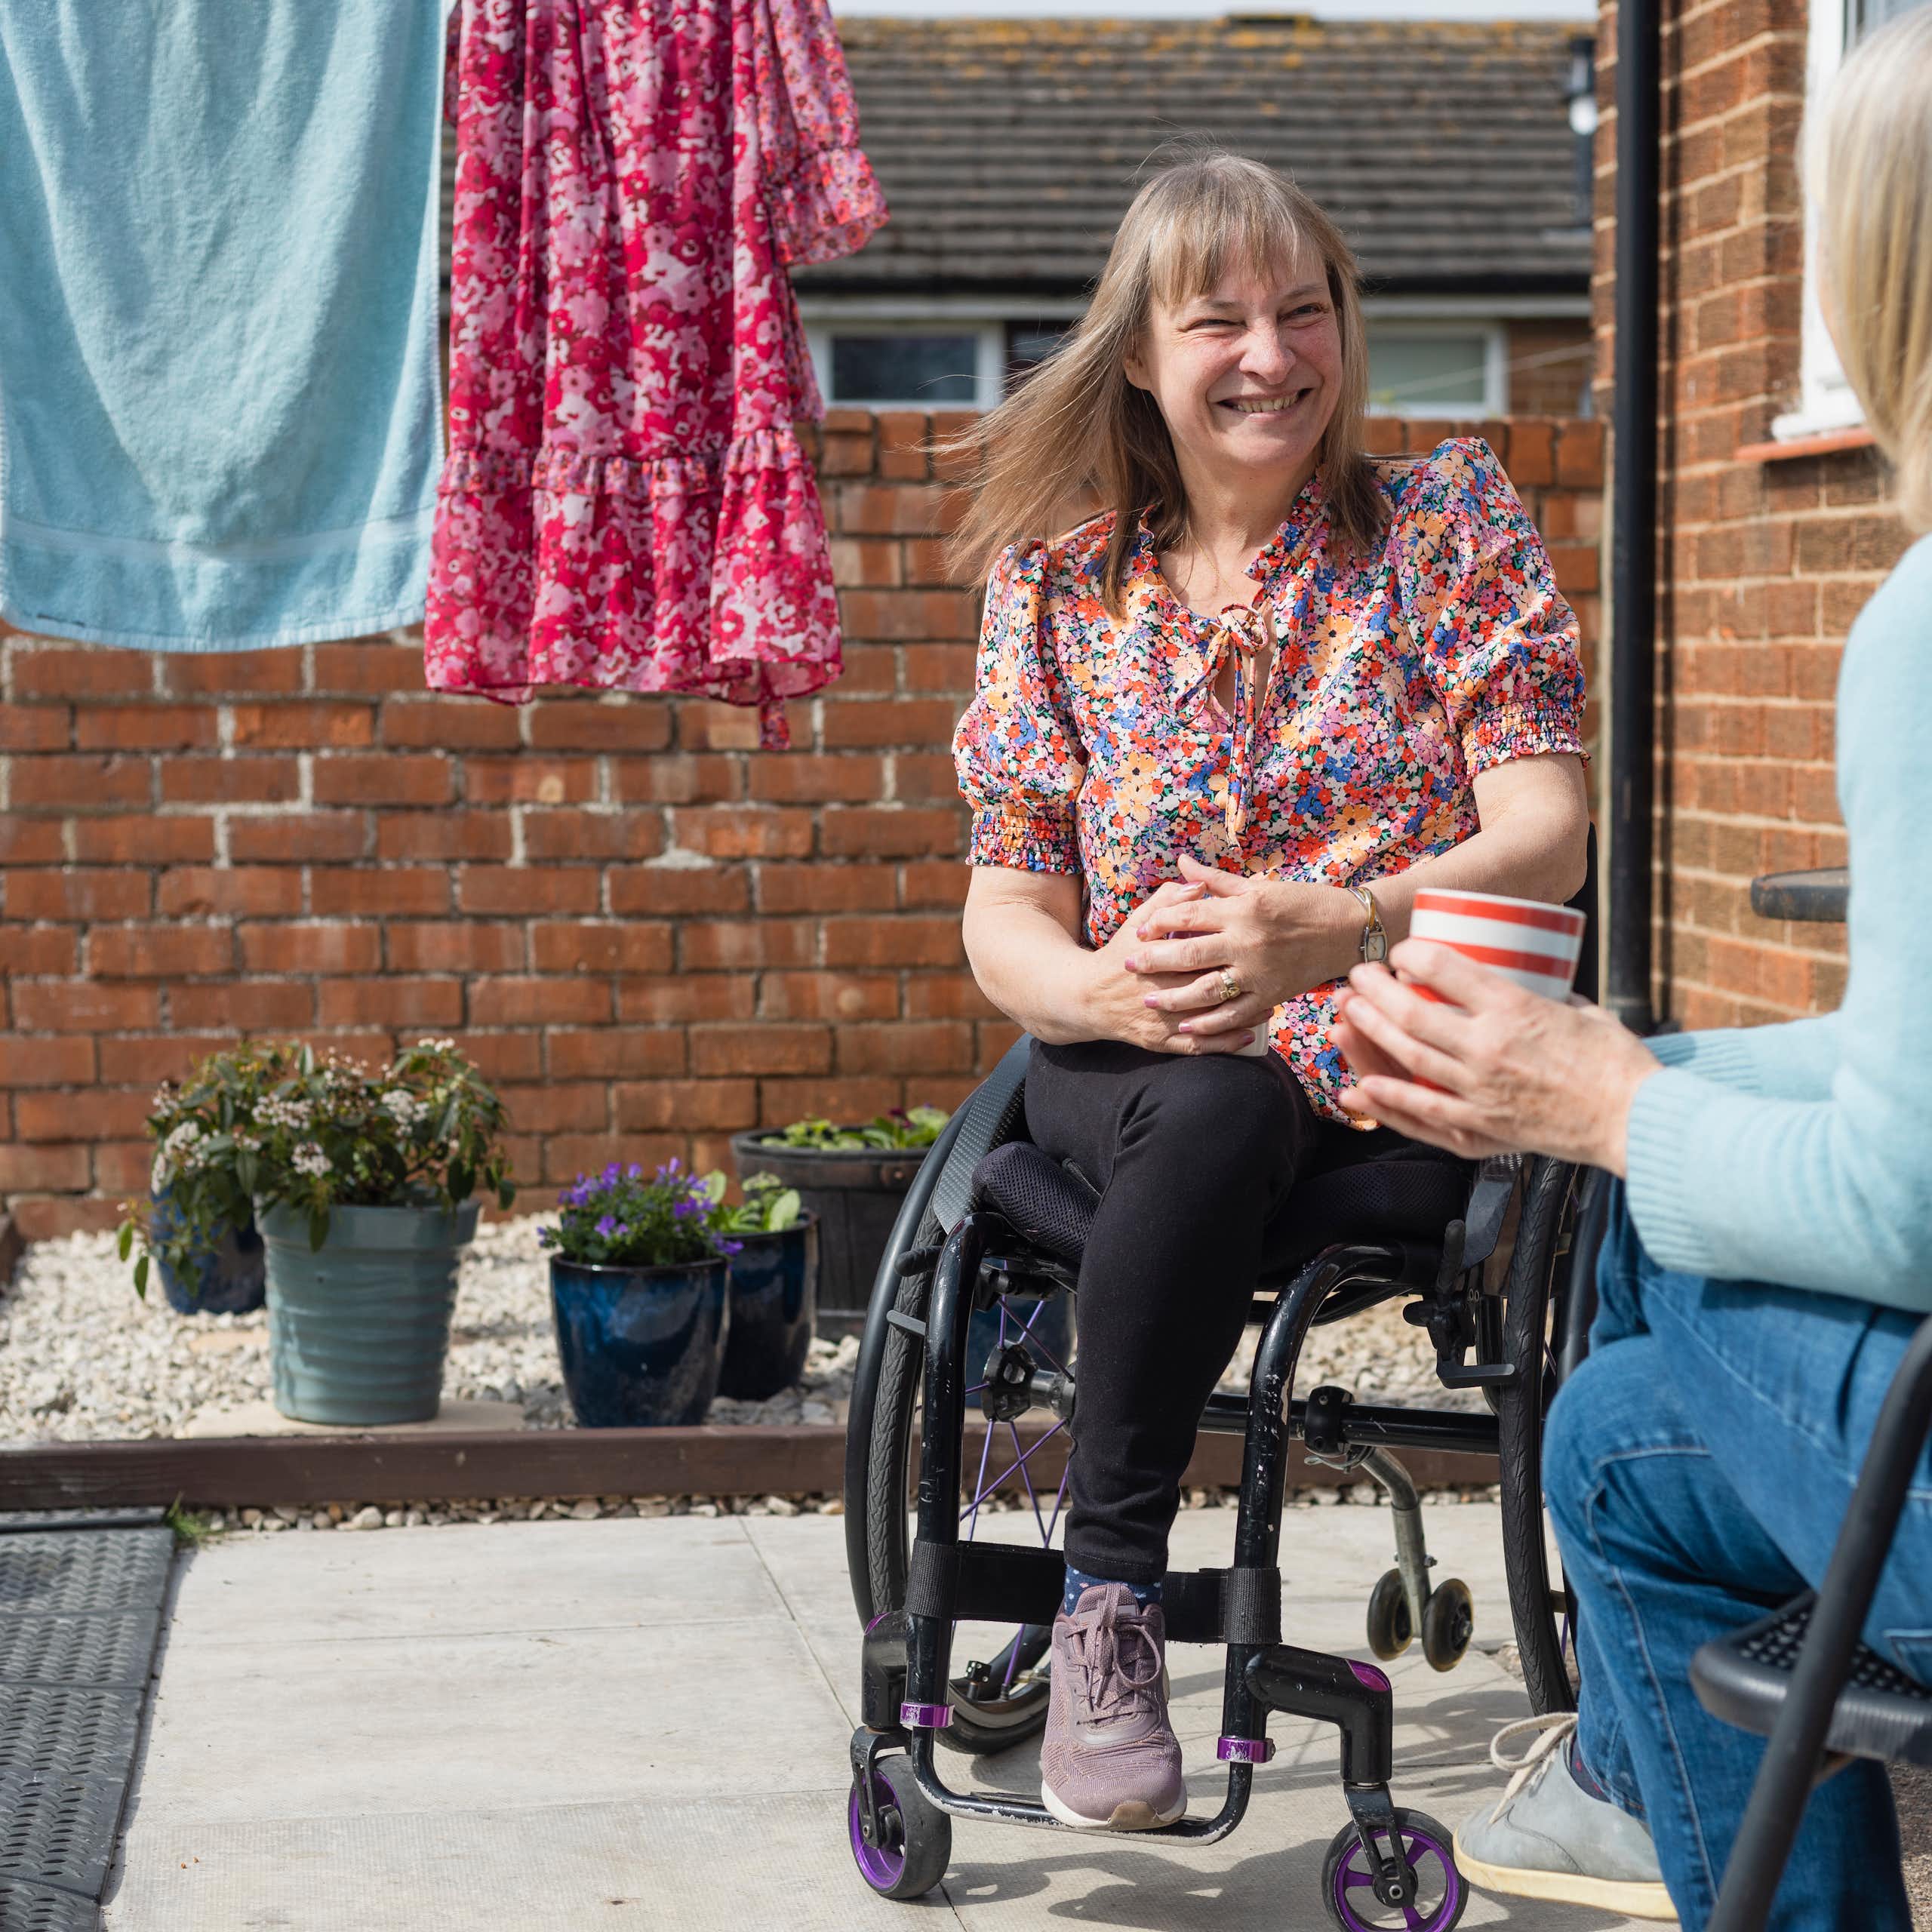 two women talking in home courtyard with washing hanging nearby. One woman using wheelchair